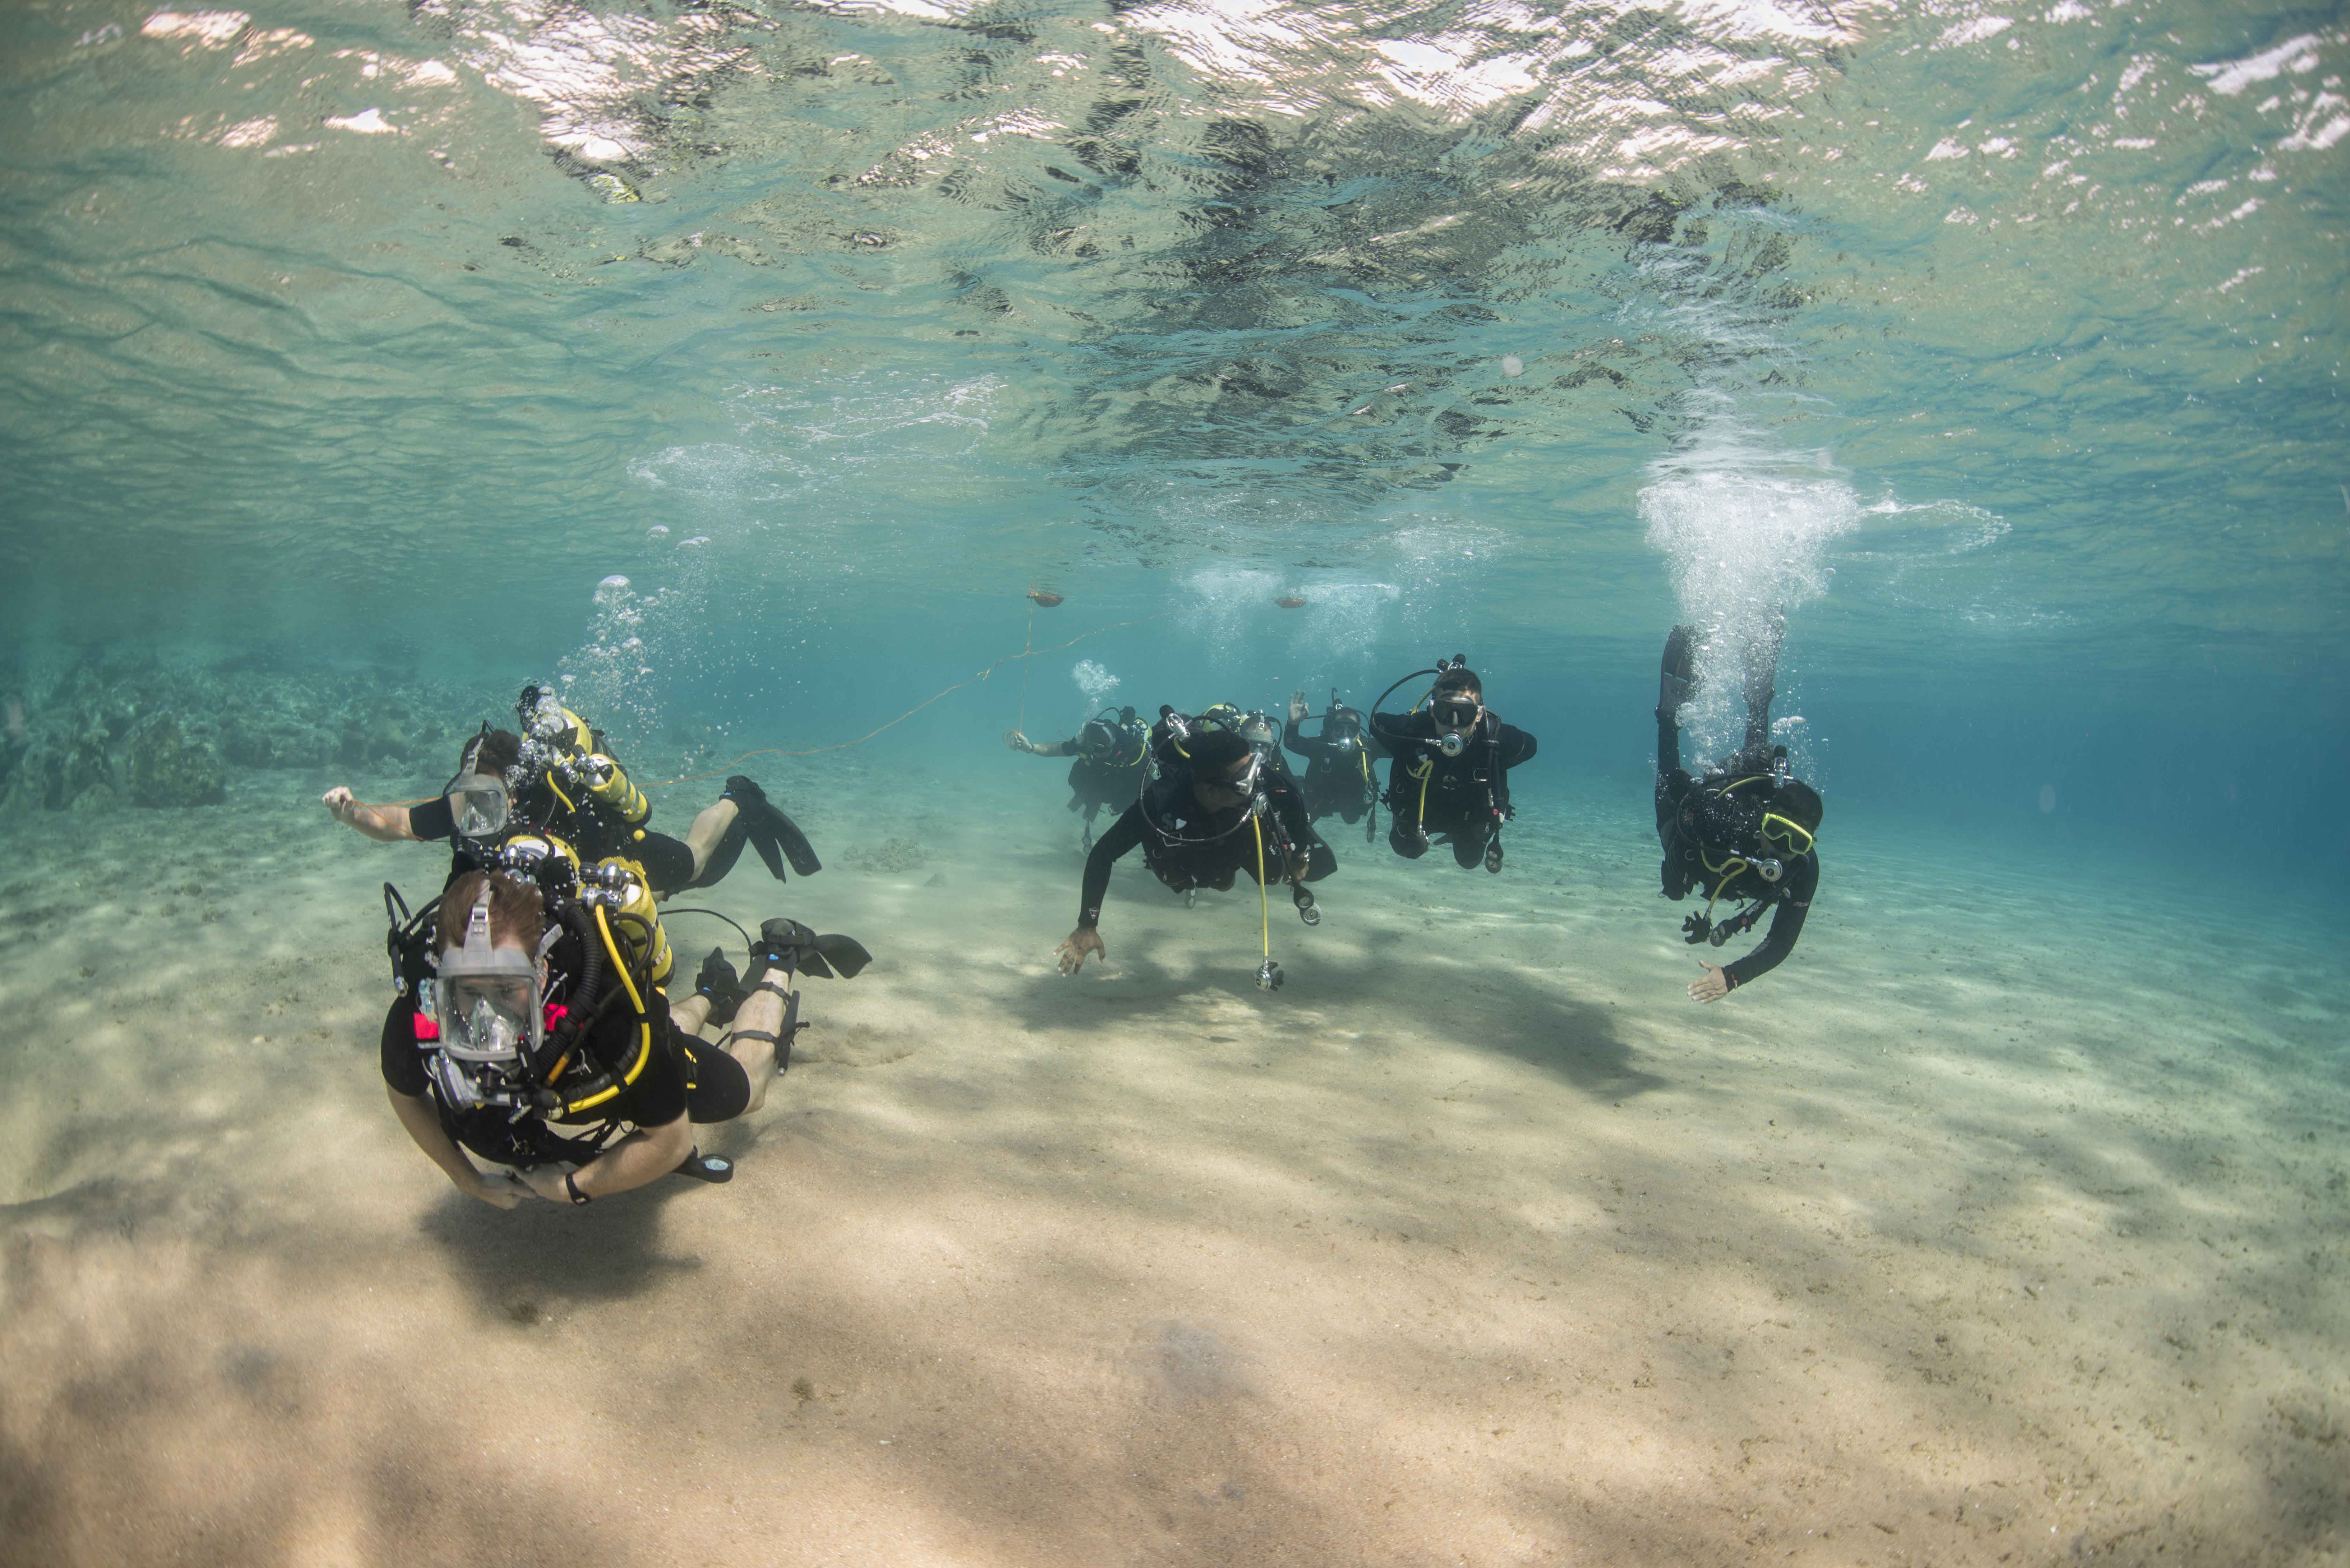 GULF OF AQABA, Jordan (Oct. 29, 2014) Clearance divers from Fleet Diving Unit 3, assigned to Task Group 523.3, and divers from the Royal Naval Force of Jordan, conduct a search dive while participating in International Mine Countermeasures Exercise (IMCMEX).  U.S. Navy photo by Mass Communication Specialist 3rd Class Daniel Rolston.